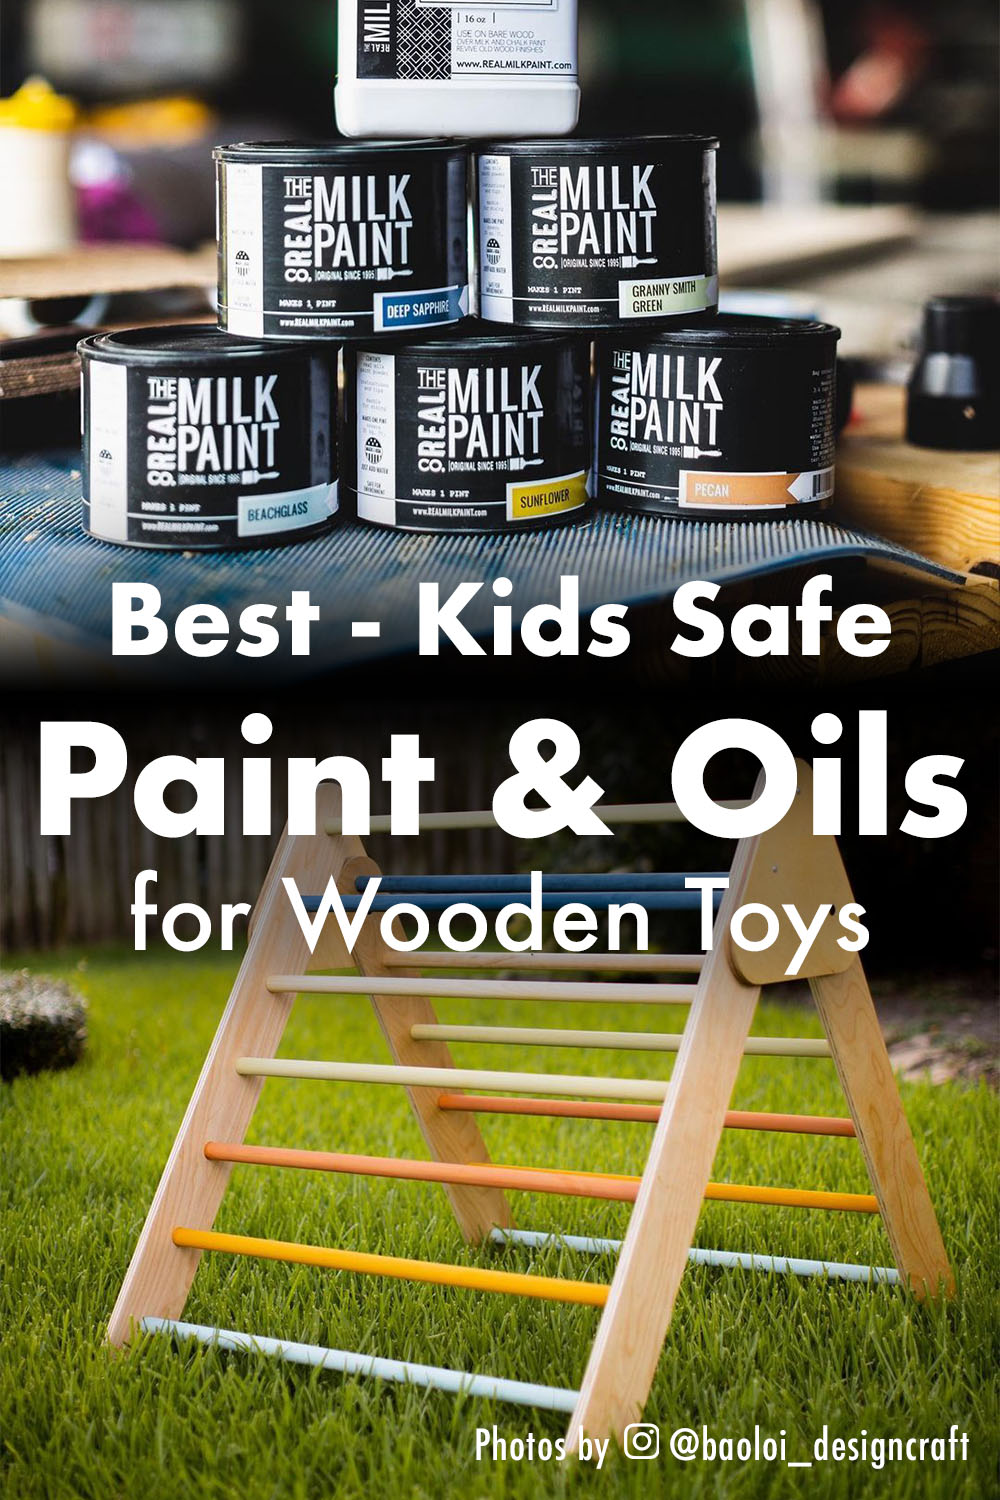 How to Safely Paint Wooden Toys